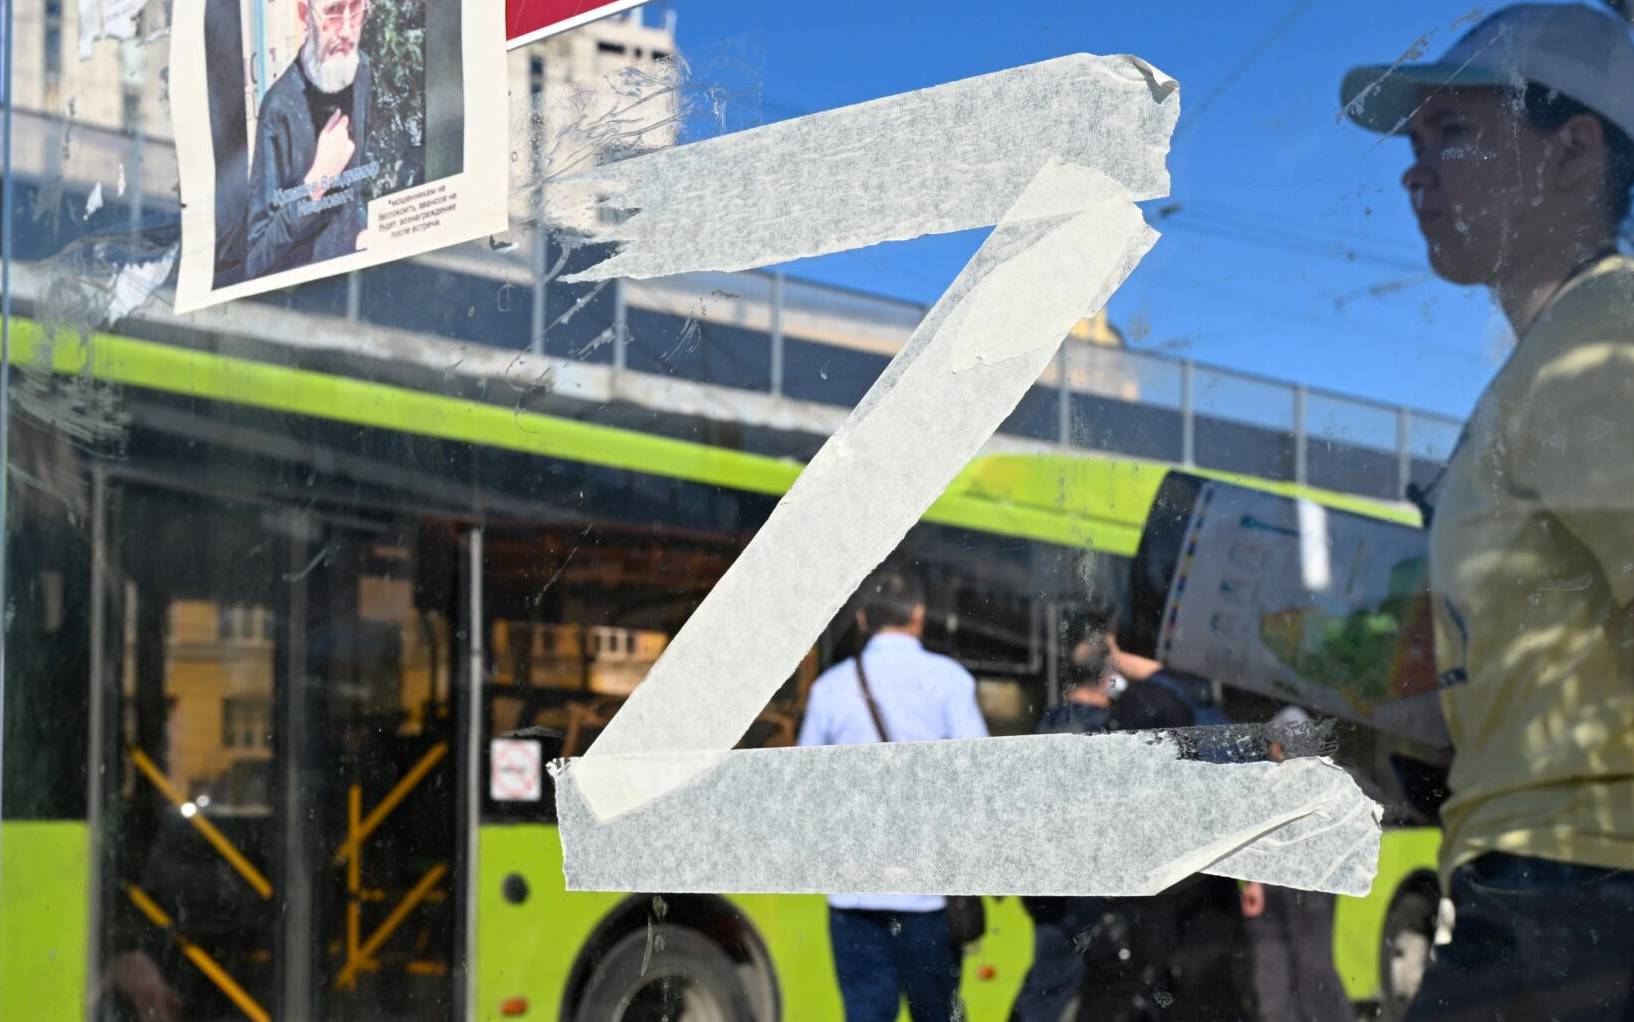 Tape forms the letter Z, which has become a symbol of support for Russian military action in Ukraine, on the glass panel of a bus stop in the southern city of Volgograd on June 6, 2022. (Photo by Kirill KUDRYAVTSEV / AFP)